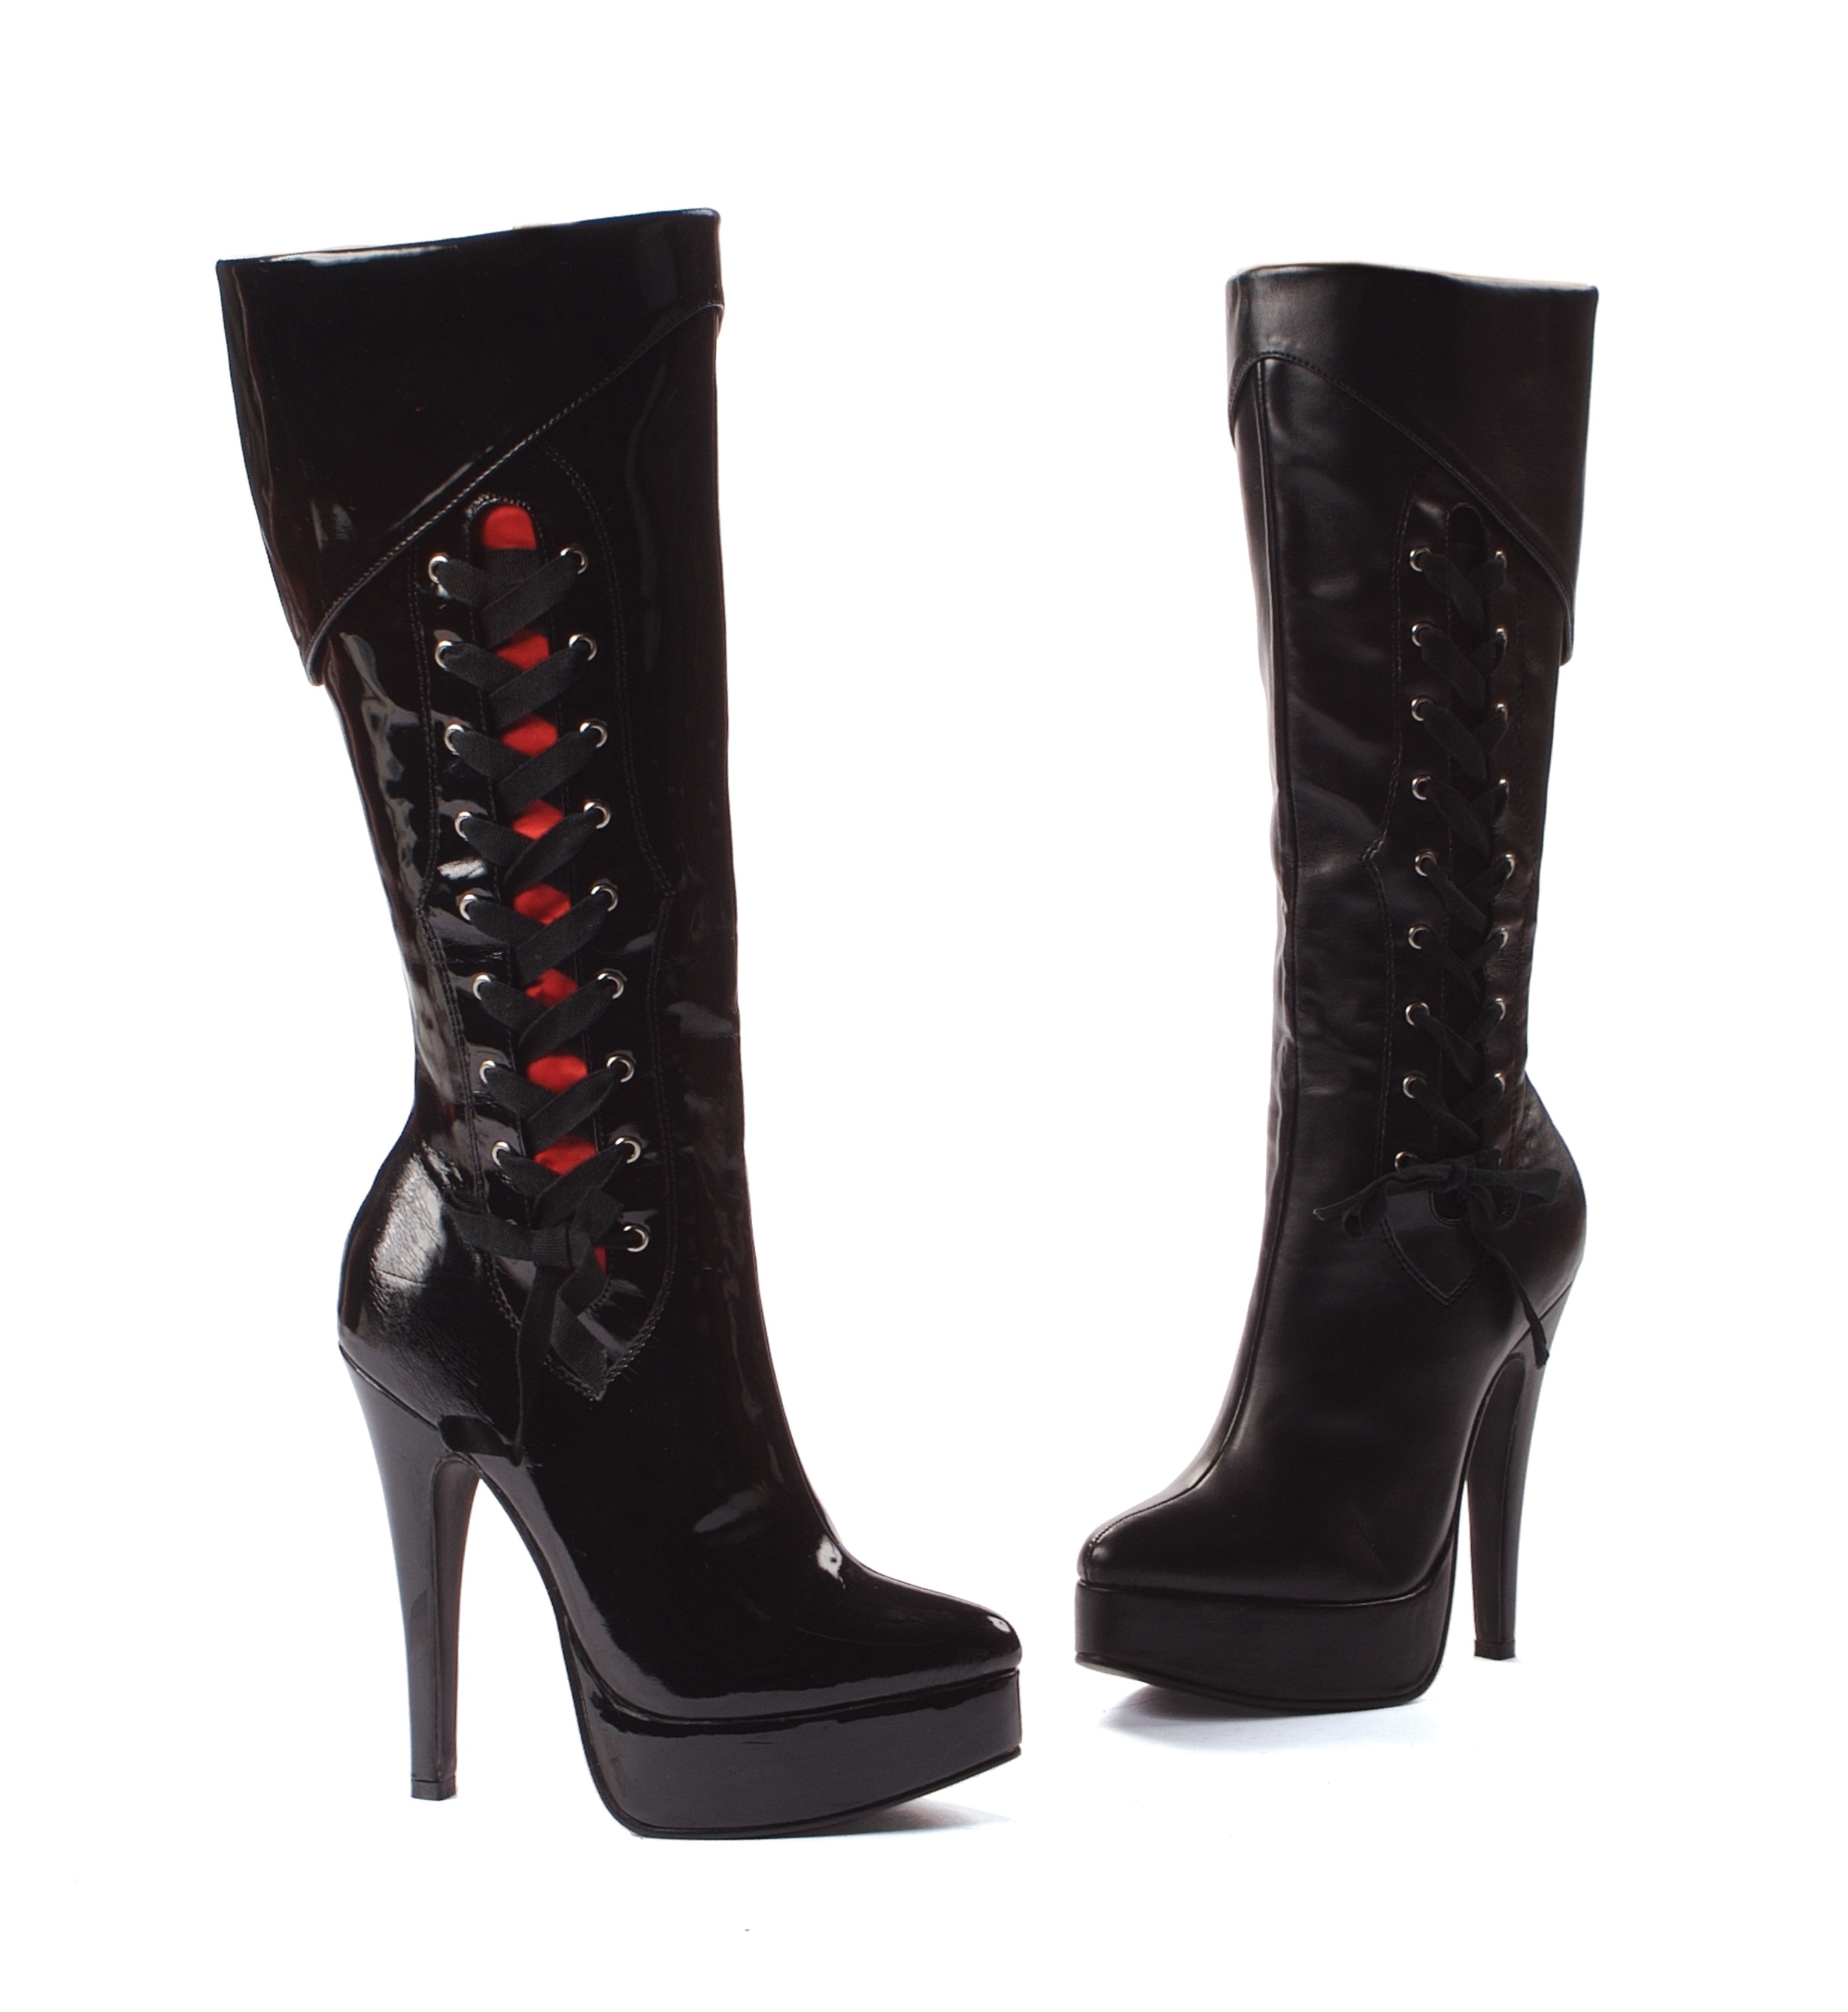 Scarlet - 5 Inch Cuffed Boots with Lace-Up Side